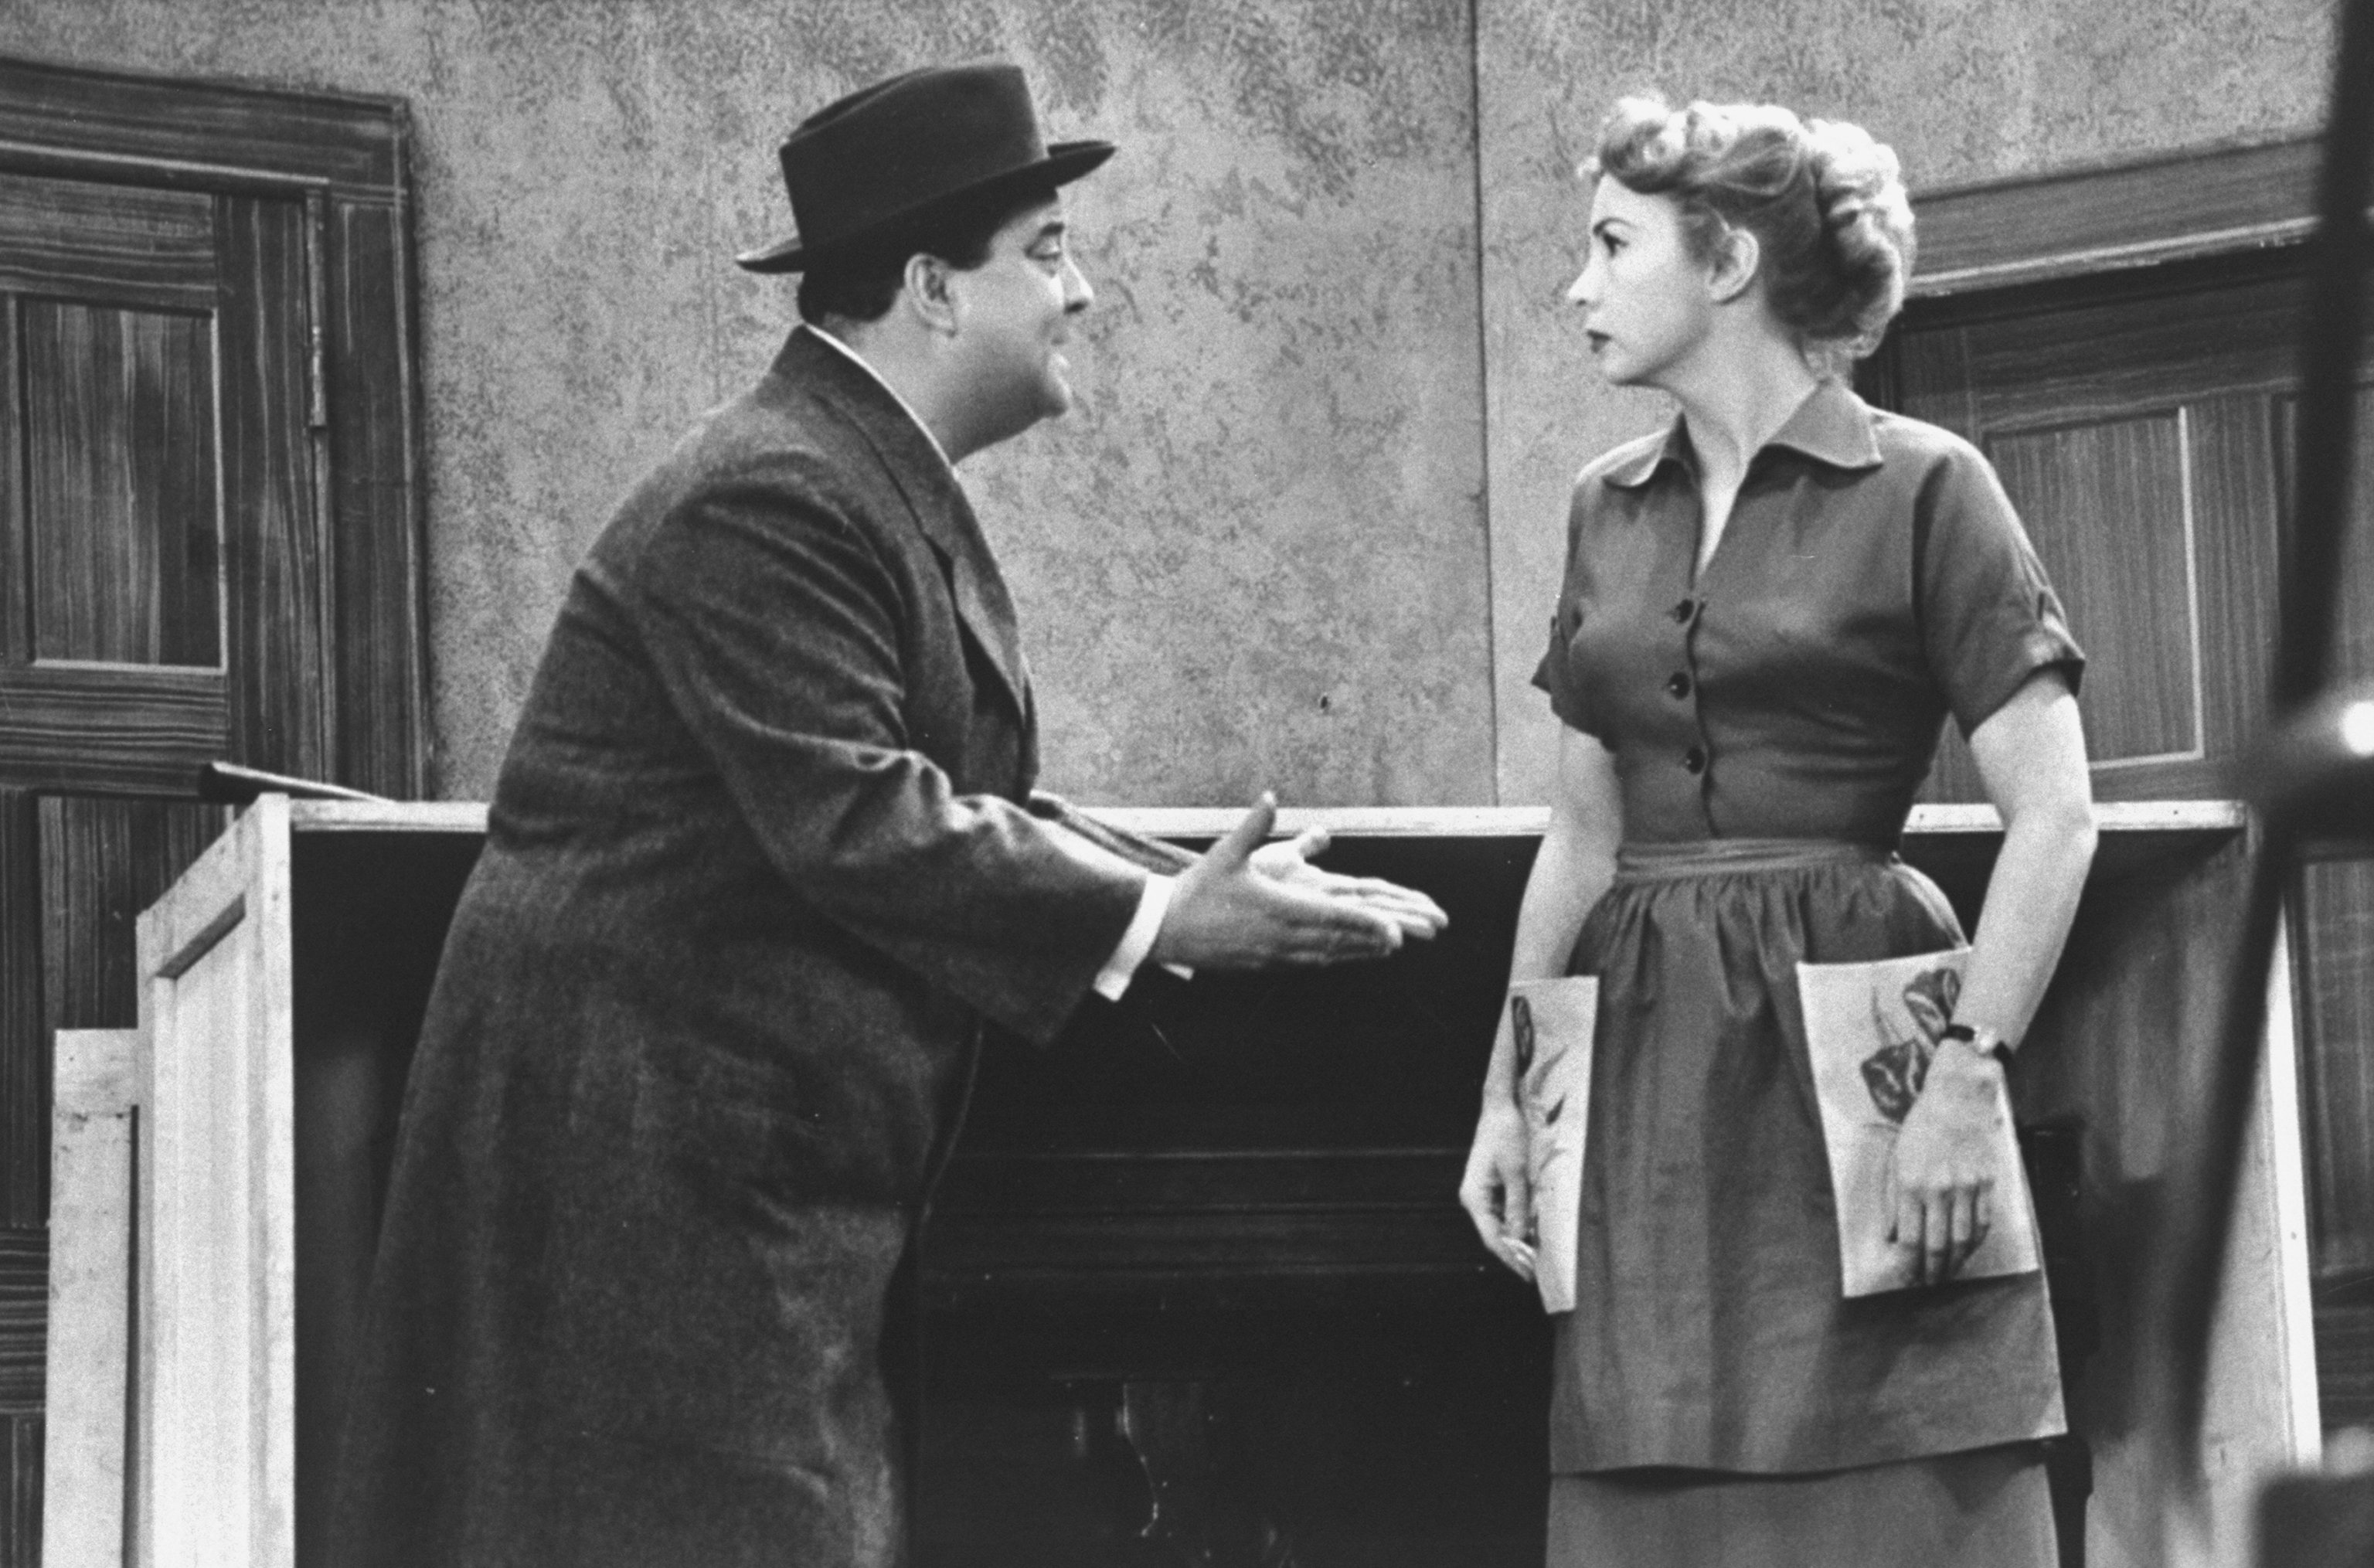 Audrey Meadows and Jackie Gleason rehearsing for an episode of The Honeymooners. | Leonard Mccombe/The LIFE Images Collection via Getty Images/Getty Images